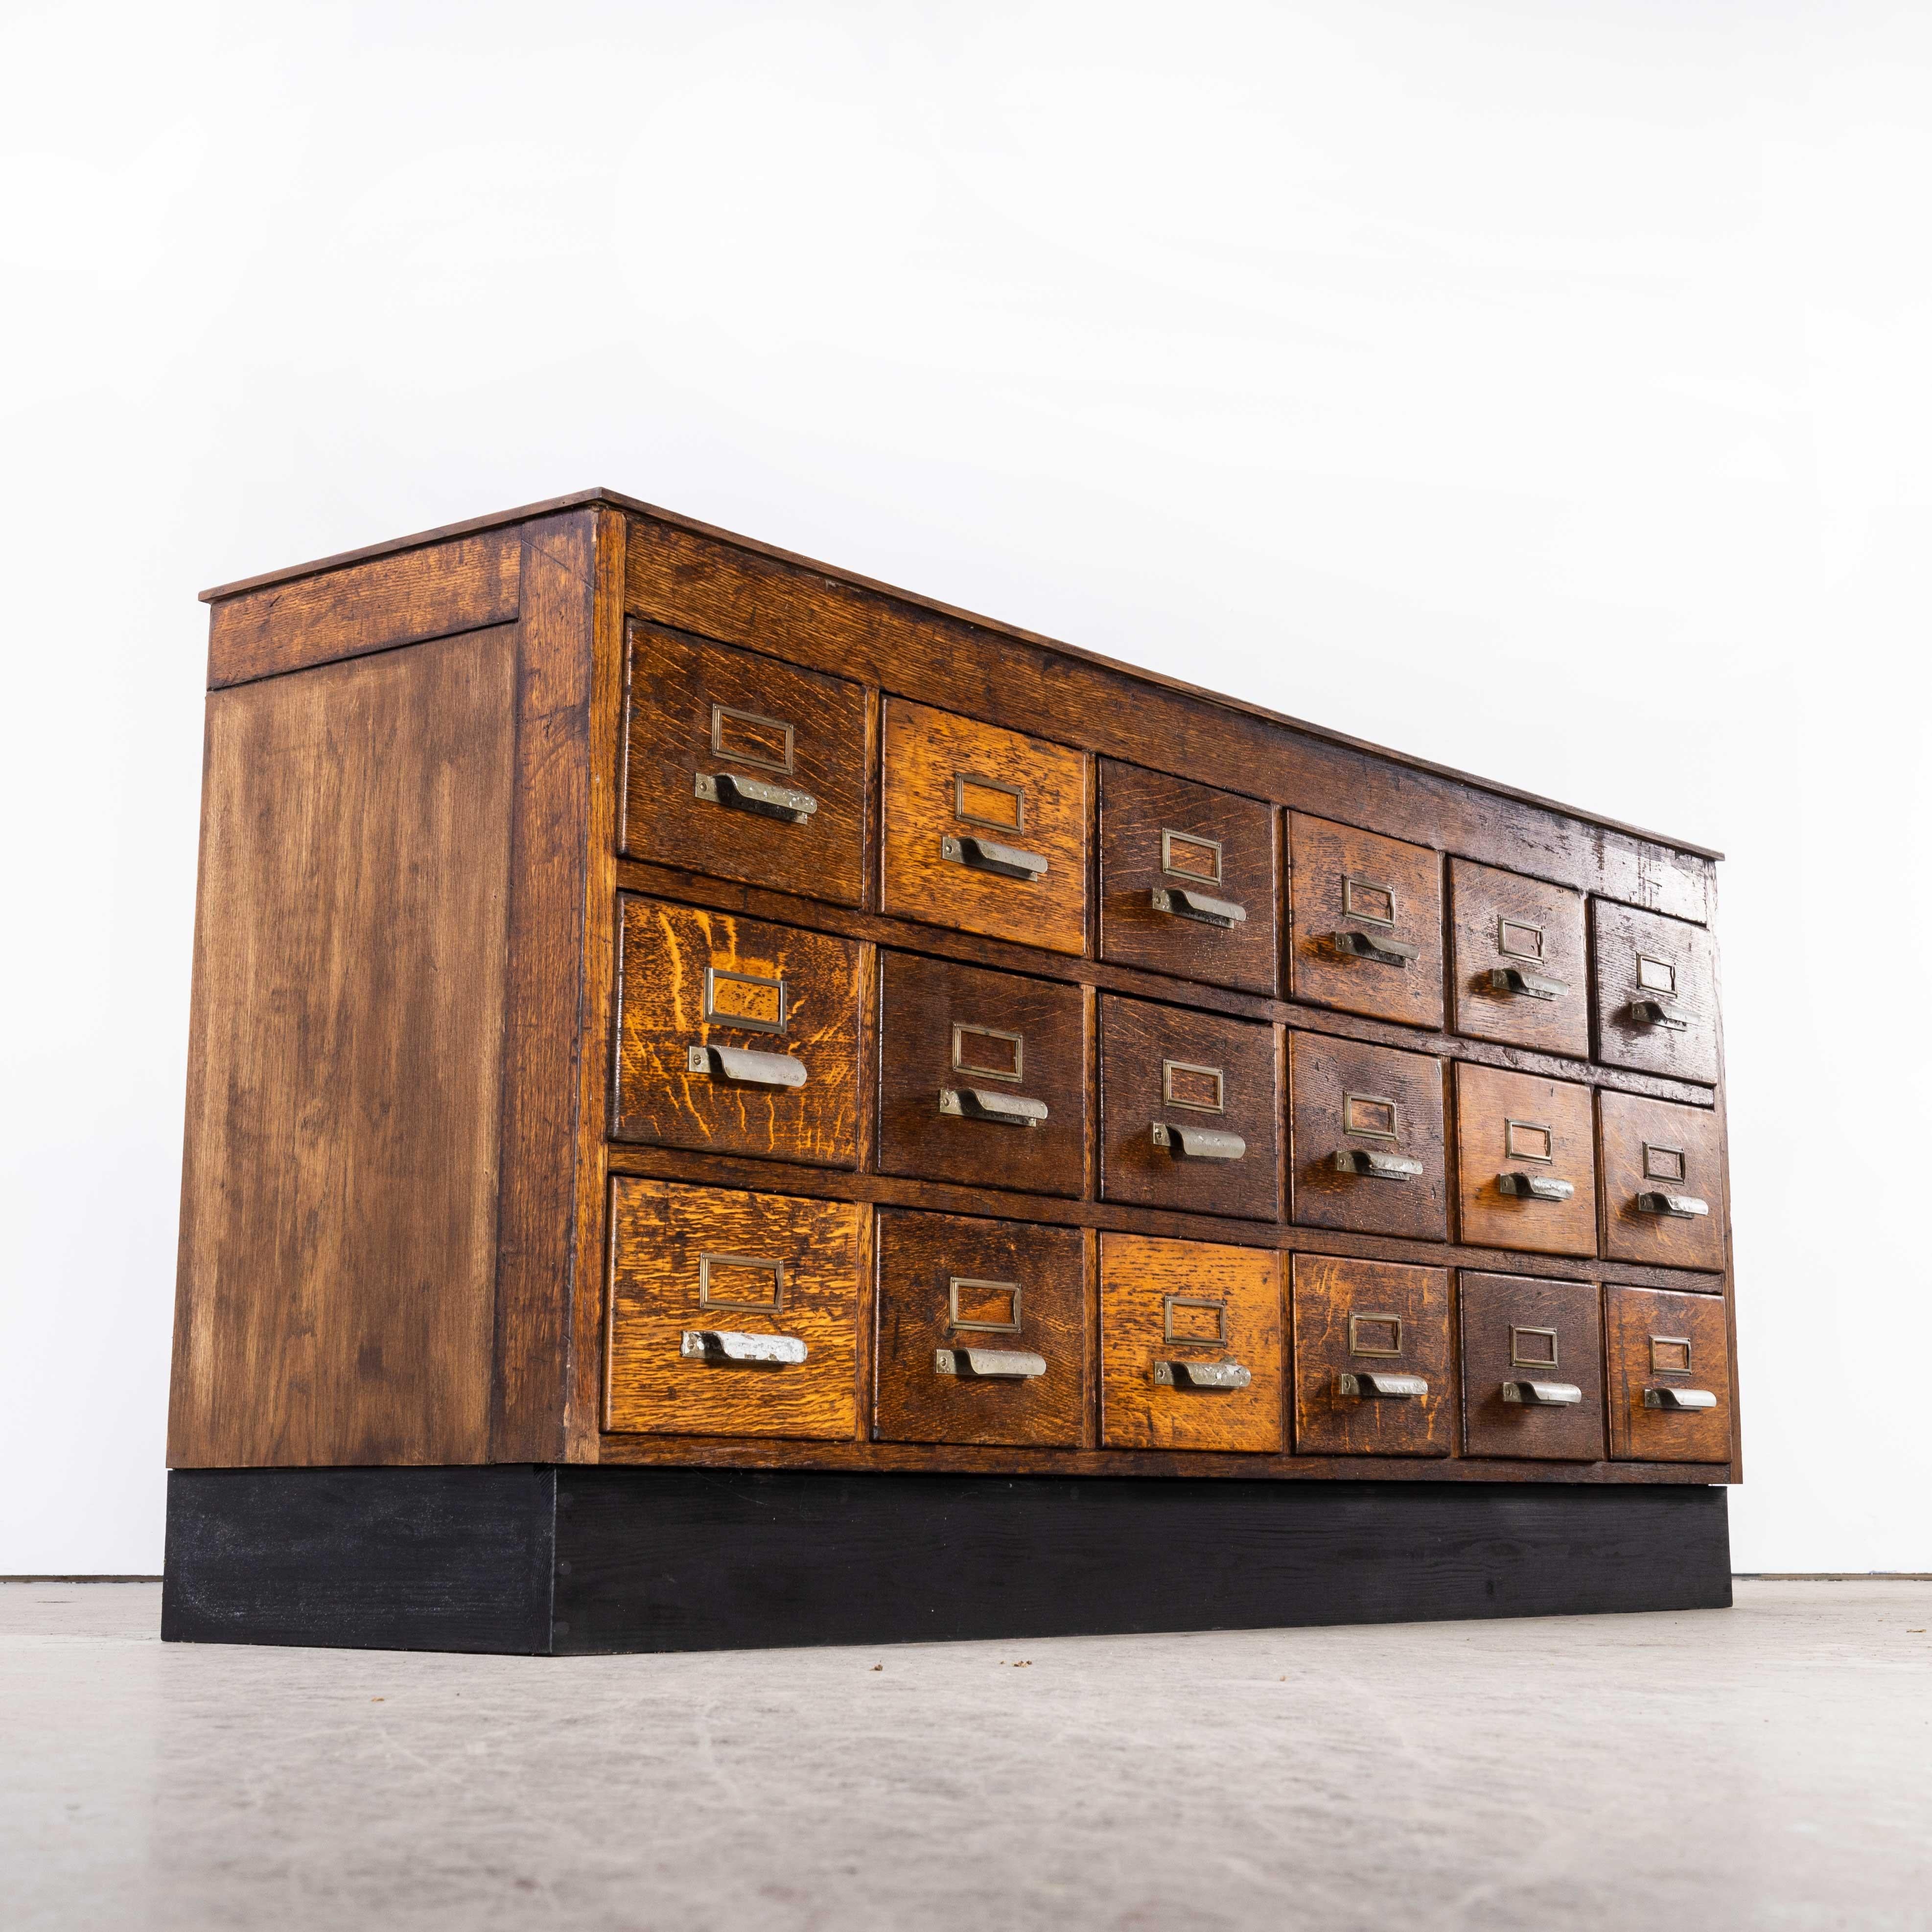 1940’s Belgian Long Low Bank Of Drawers – Eighteen (1675)
1940’s Belgian Long Low Bank Of Drawers – Eighteen (1675). Sourced in Belgium this bank of drawers is principally made of oak with the main carcass and drawer fronts made in oak. The drawers